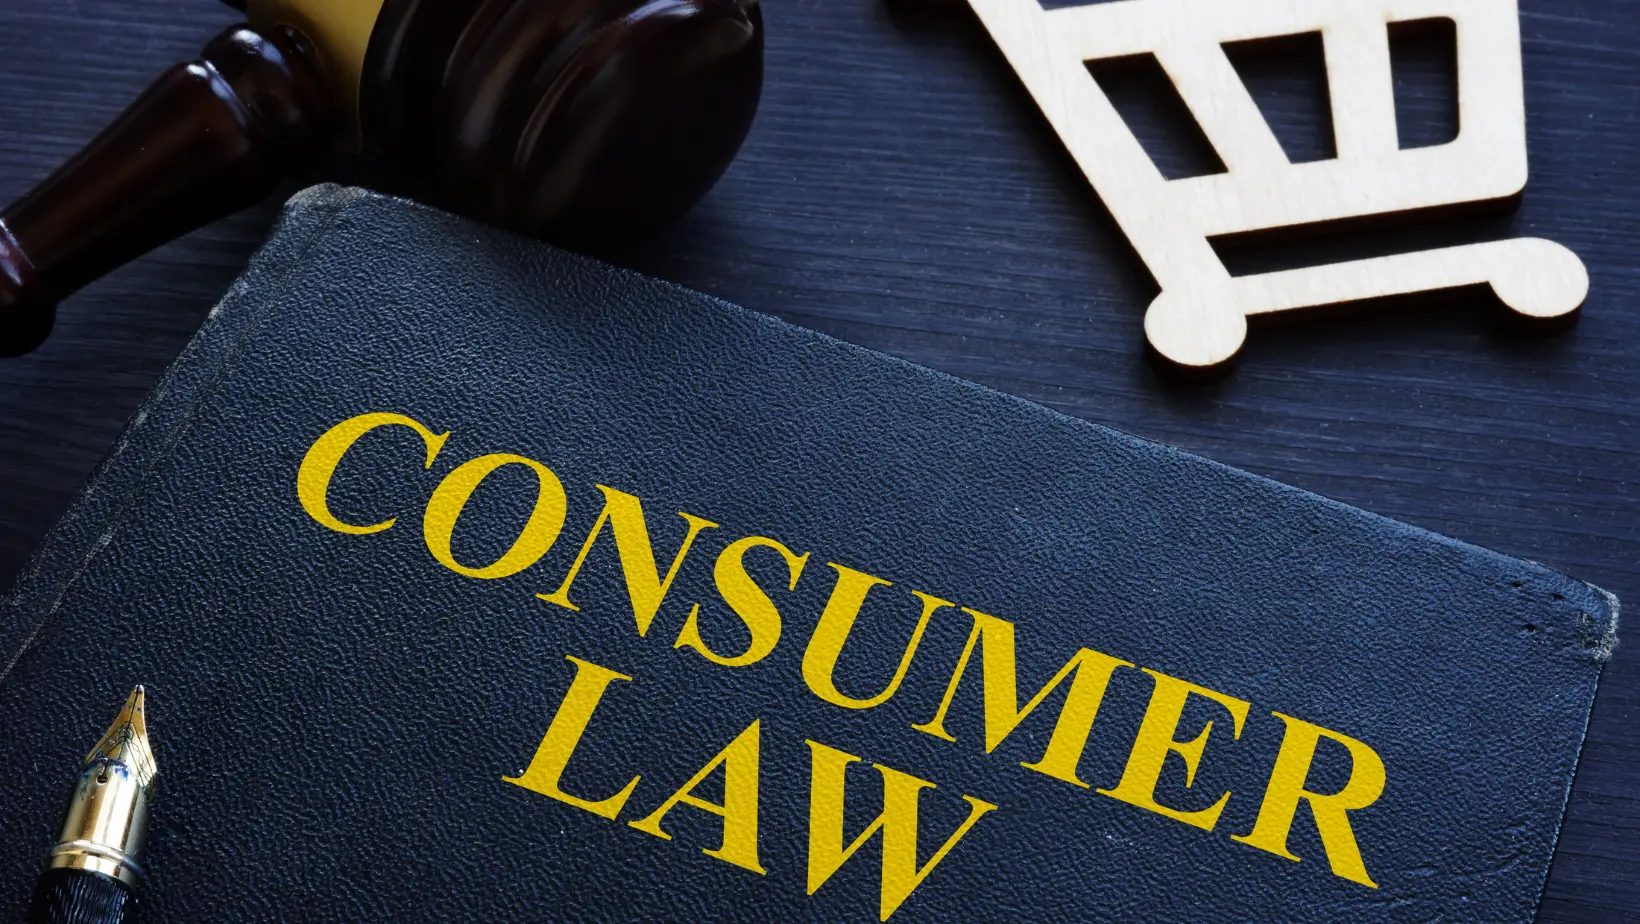 RIGHTS AS A CONSUMER